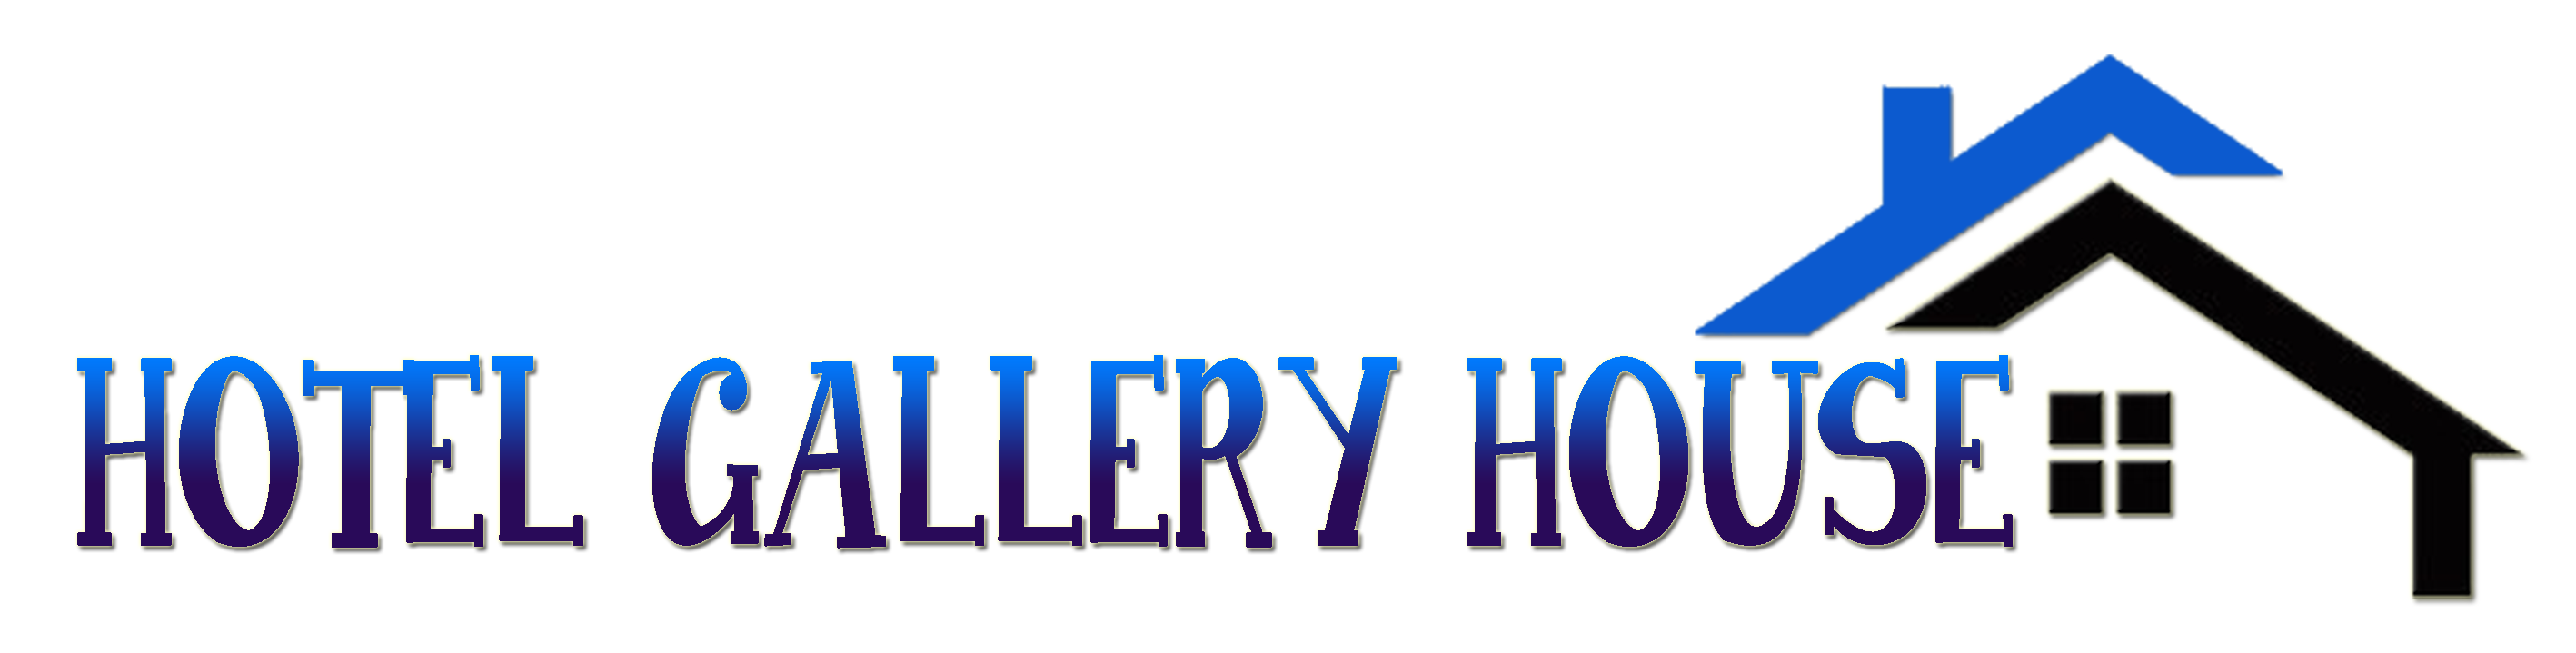 Hotel Gallery House